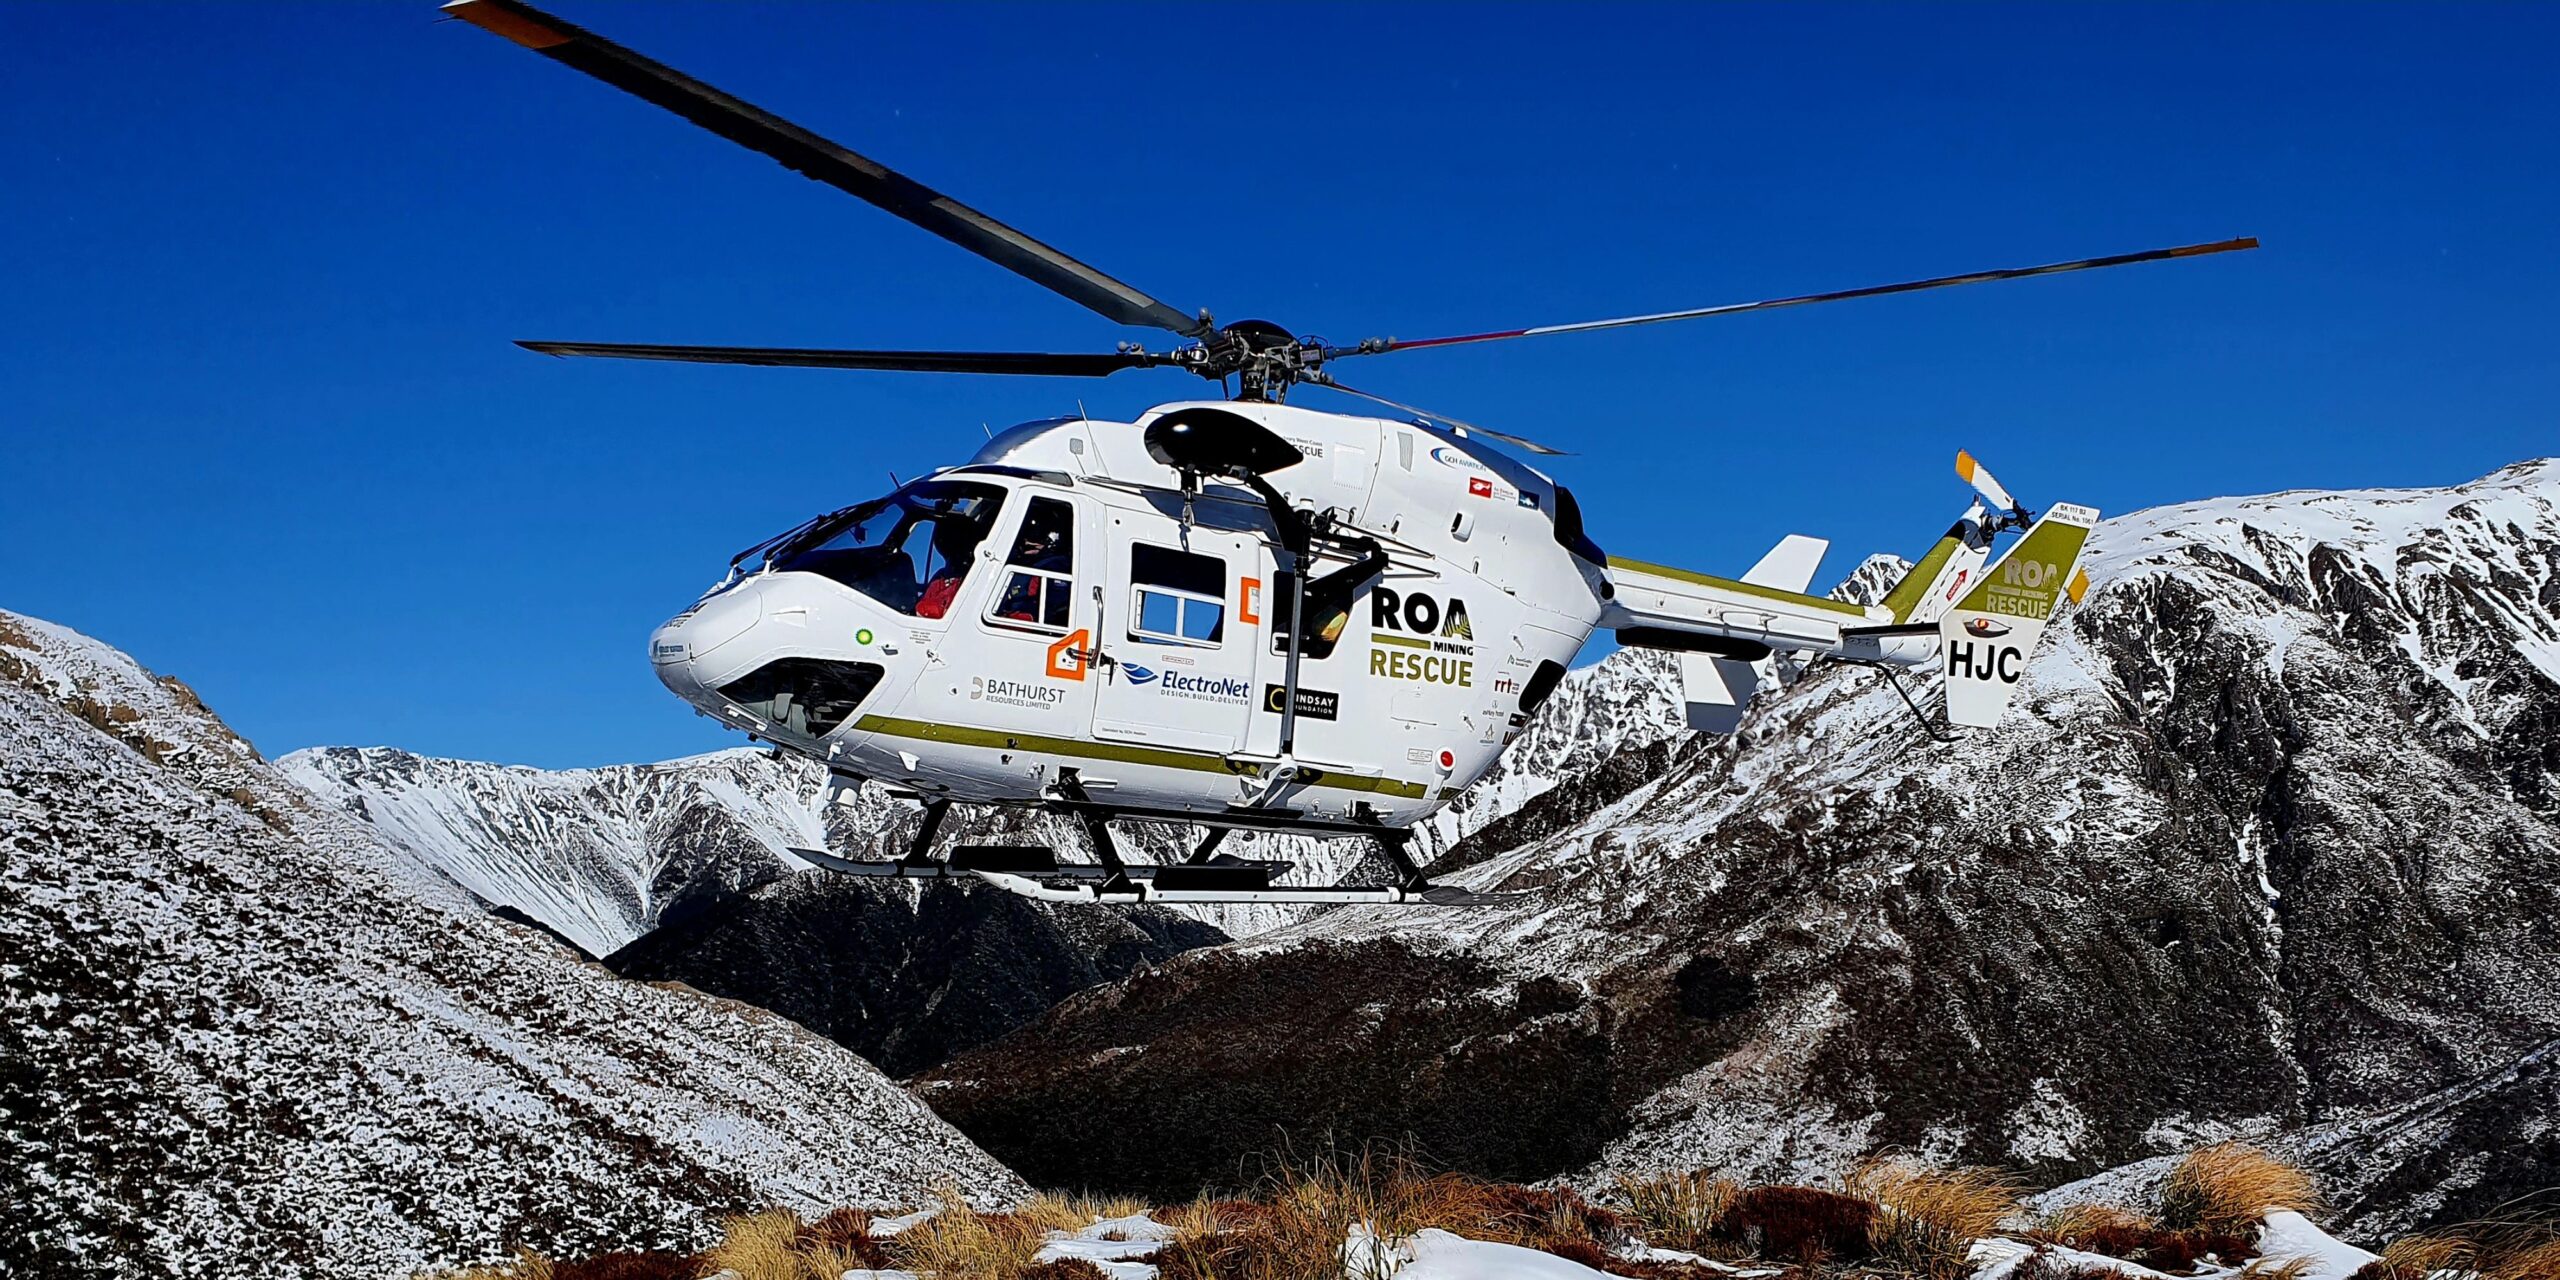 roa mining rescue helicopter